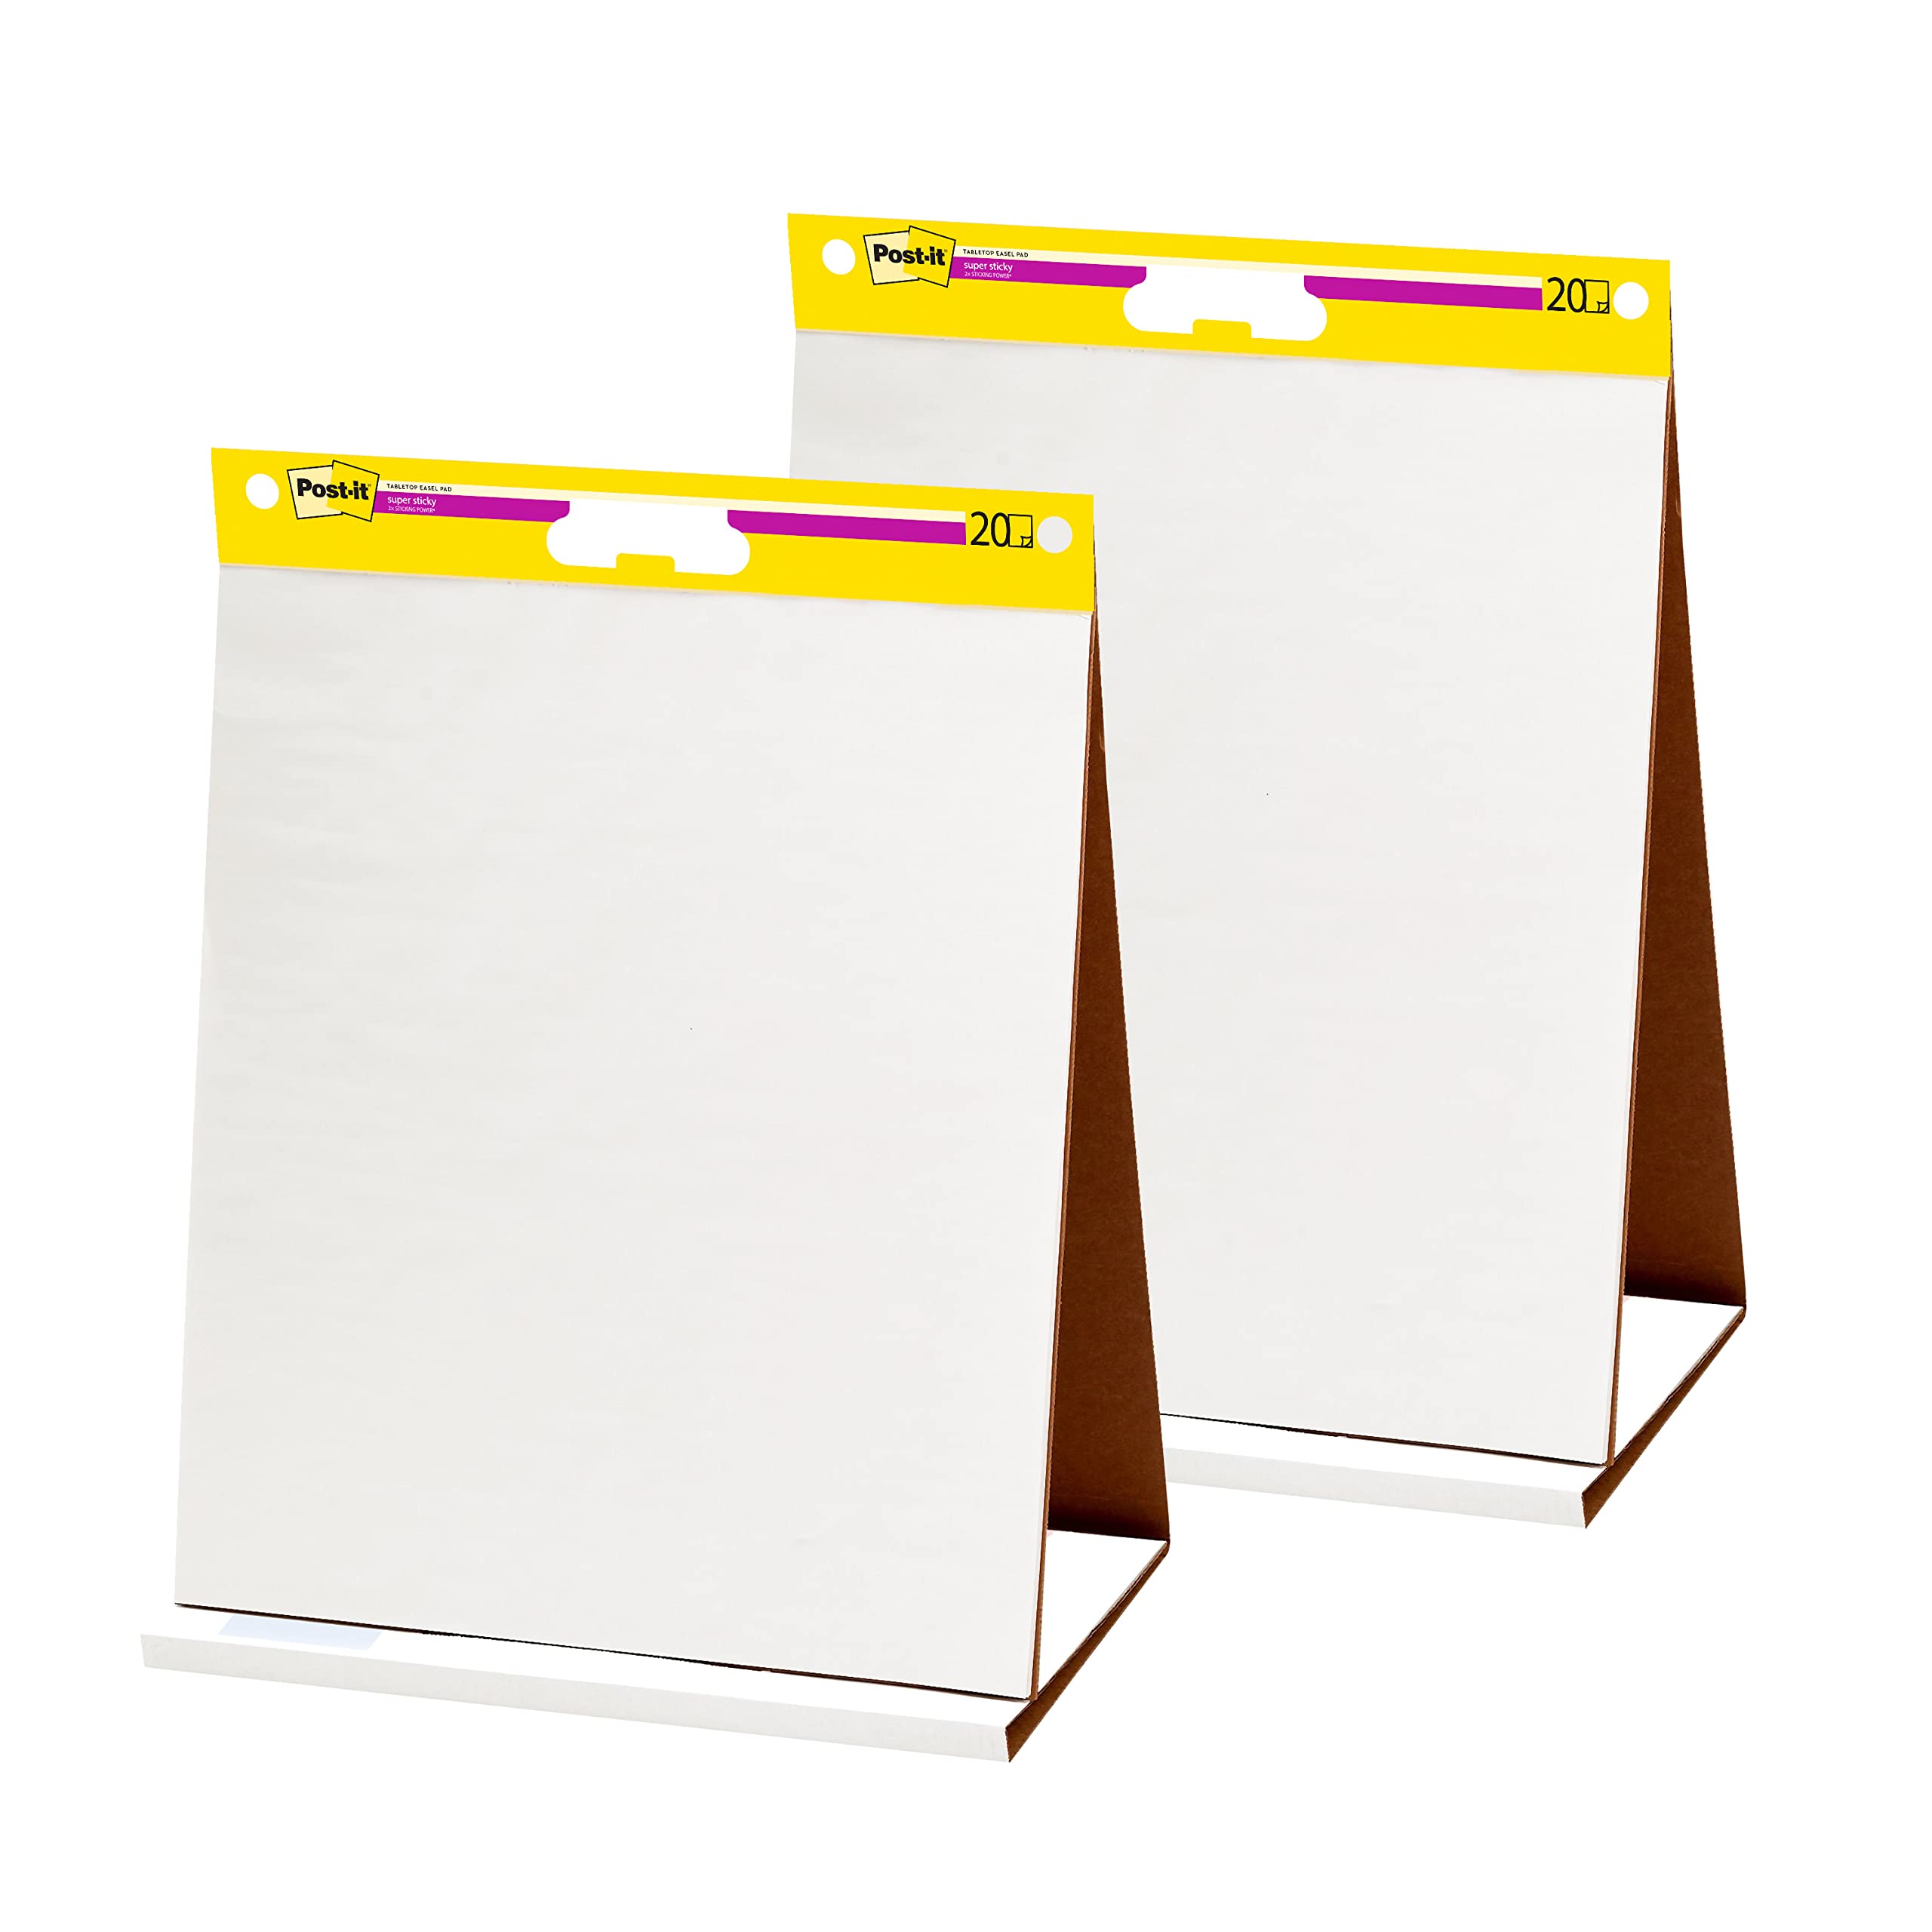 Post-it Doodle Pad, Portable Art Easel, Self-Stick Tabletop Easel Pad, 20 in x 23 in, 20 Sheets/Pad, 2 Pads/Pack (563R-DP)